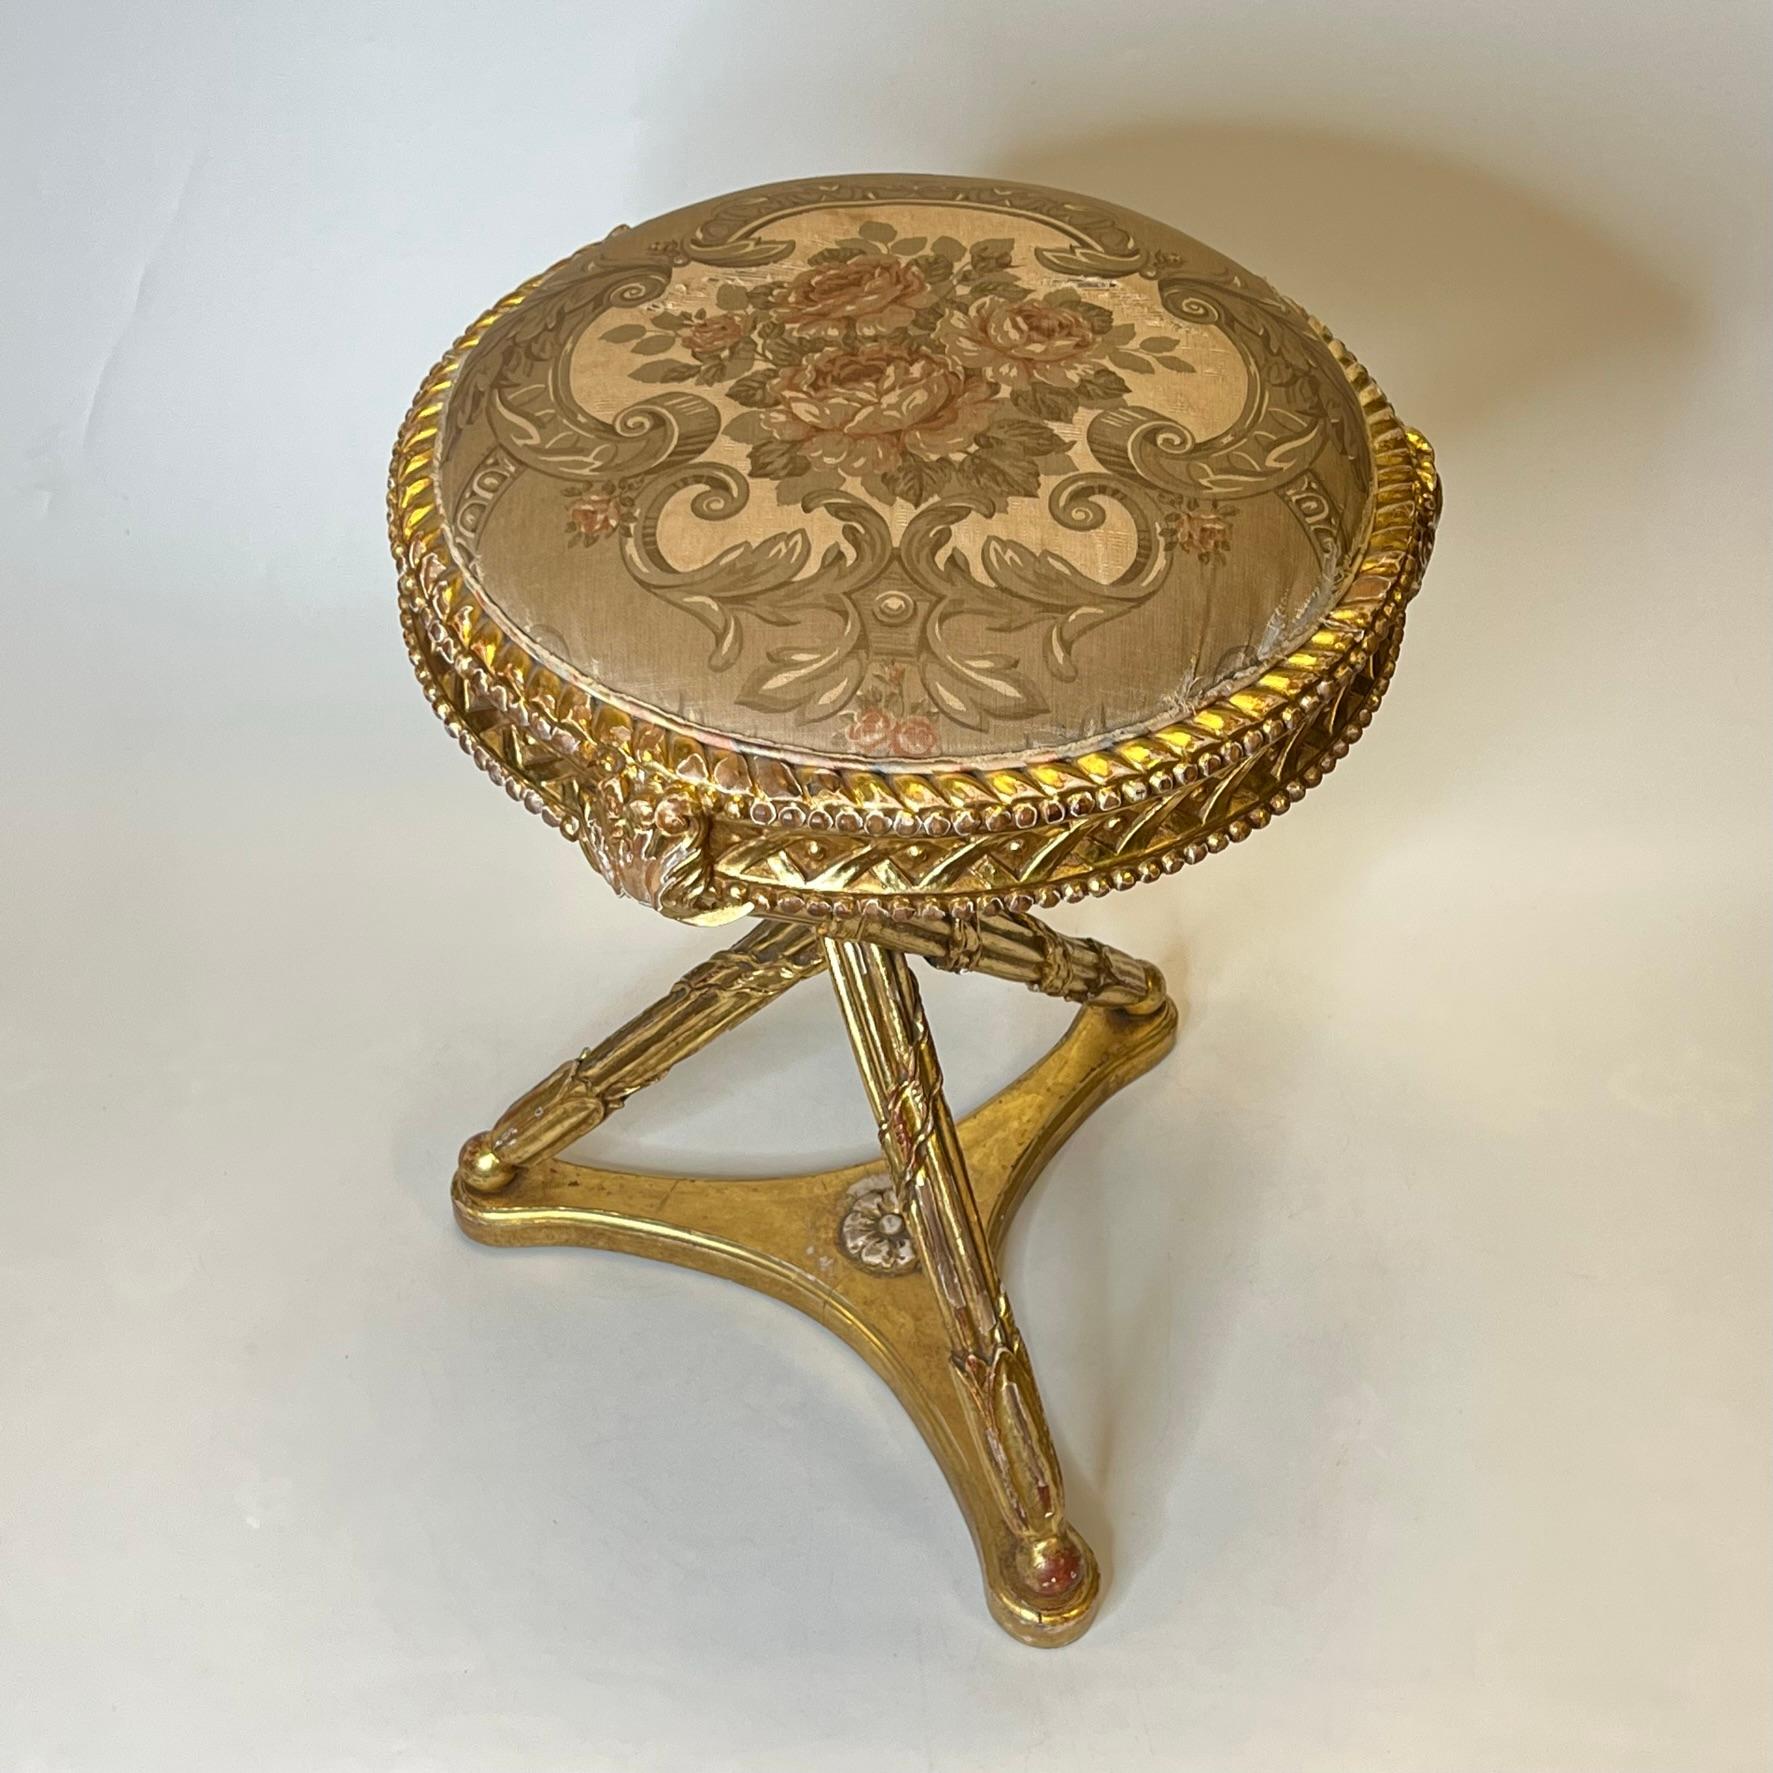 Very Fine quality and unusual French turn of the century Louis XVI Style Giltwood Stool.